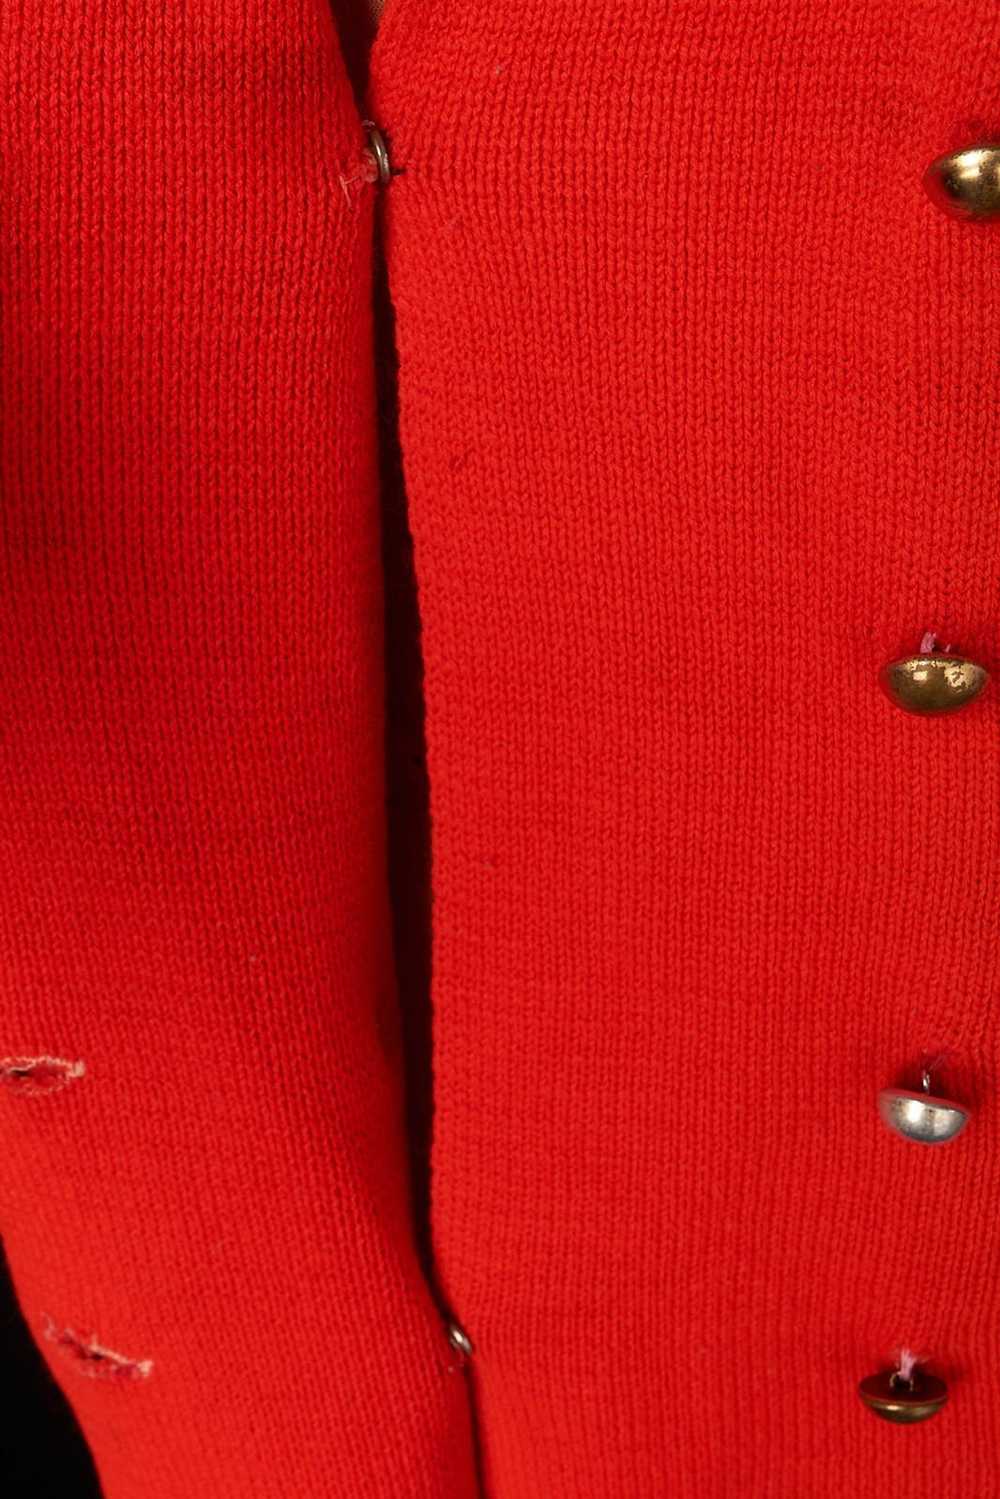 Vintage 1970s Red Cardigan Sweater - image 5